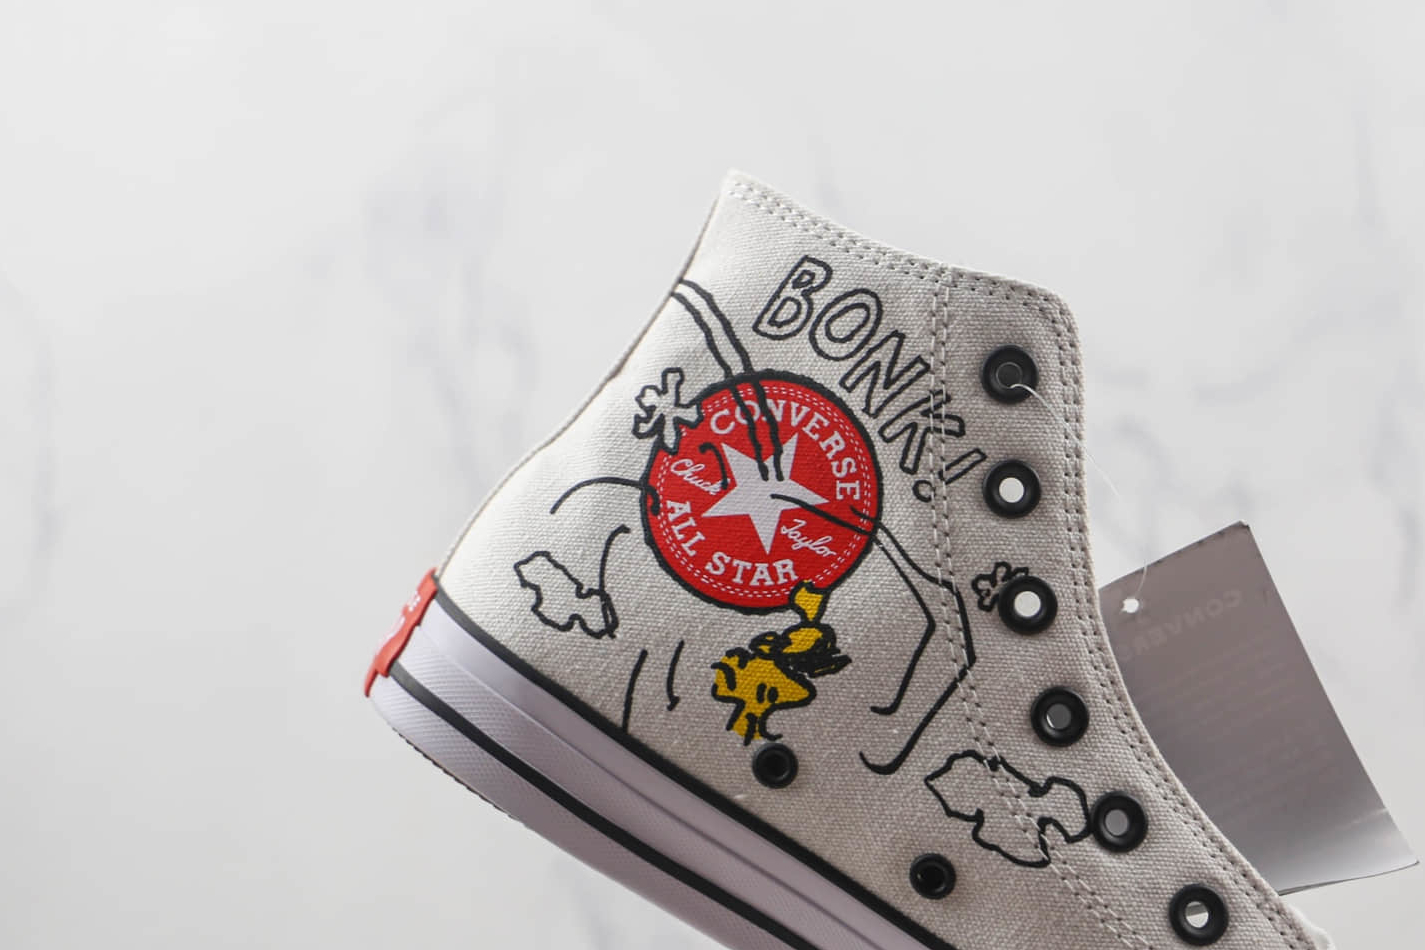 Converse Peanuts x Chuck Taylor All Star High 'Snoopy and Woodstock' A01872C